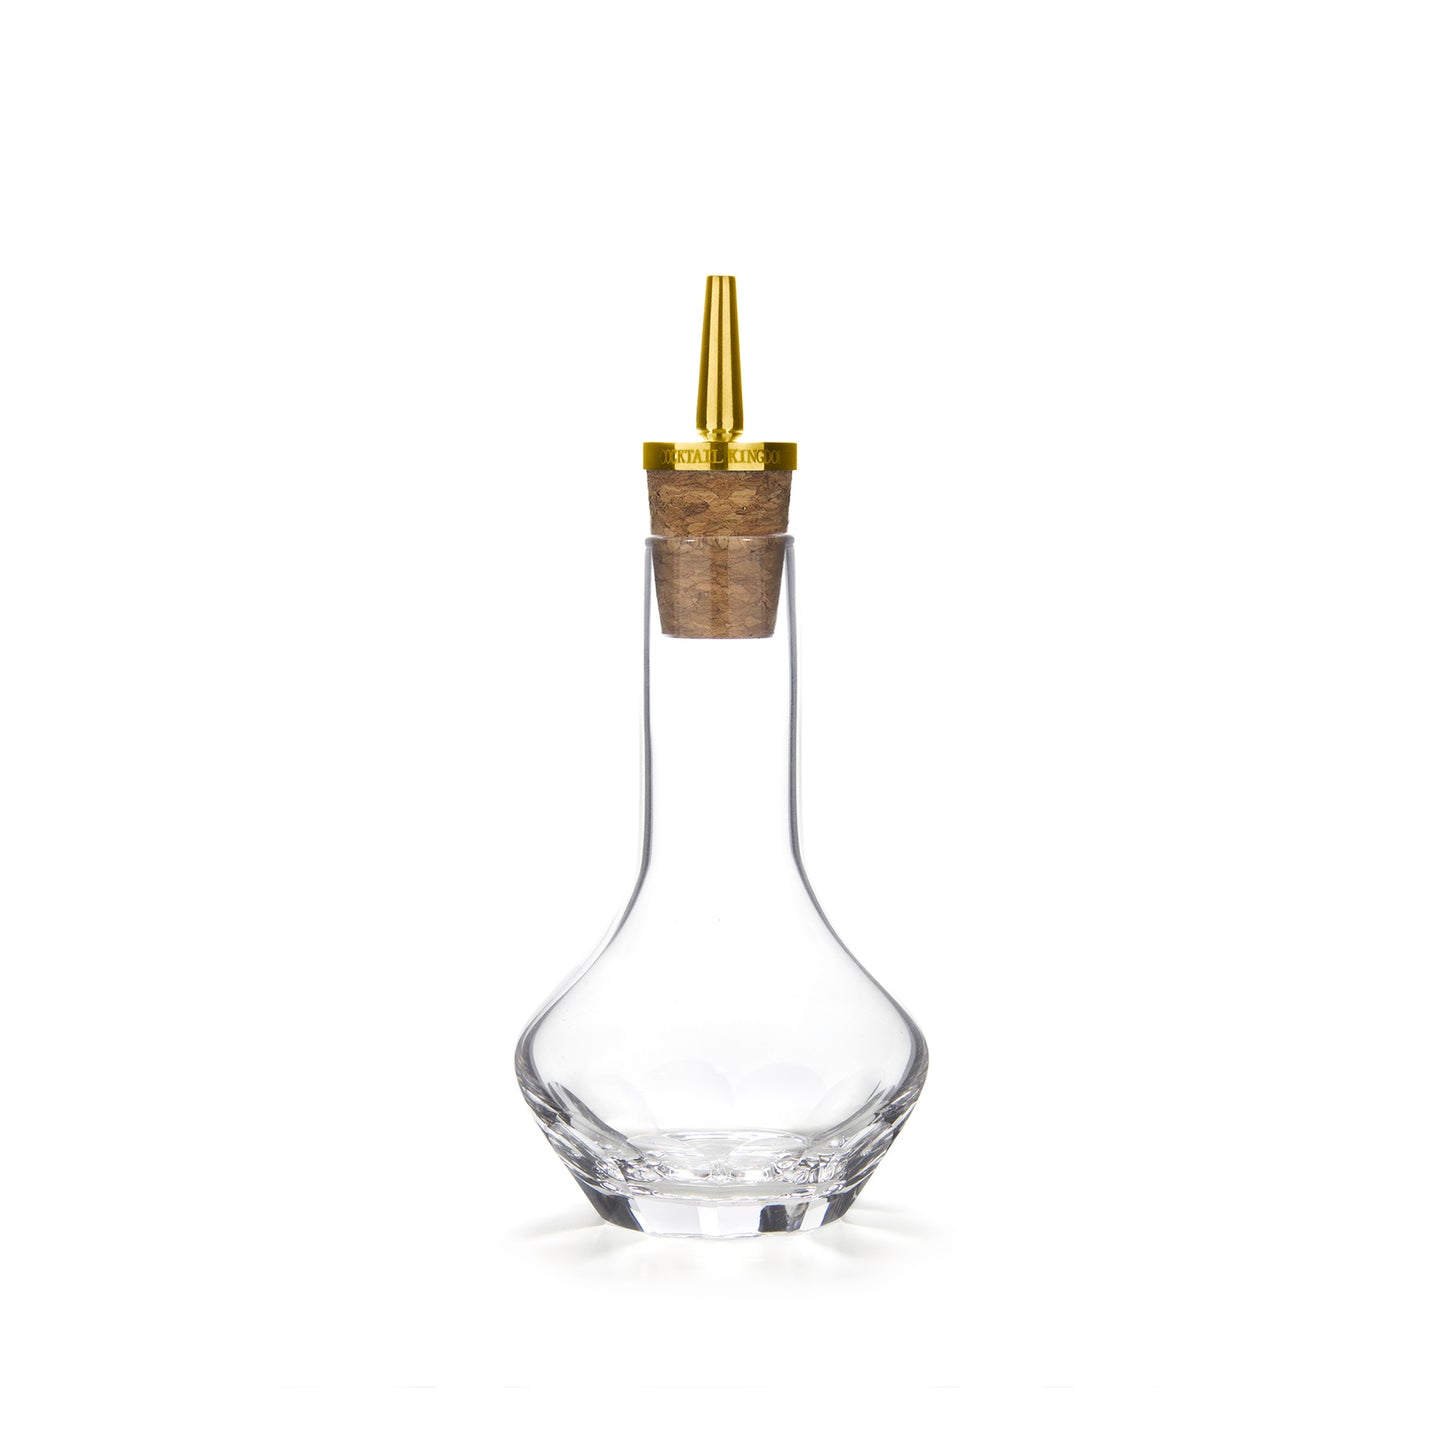 BEVELED BITTERS BOTTLE – GOLD-PLATED DASHER TOP / 50ml (1.7oz)